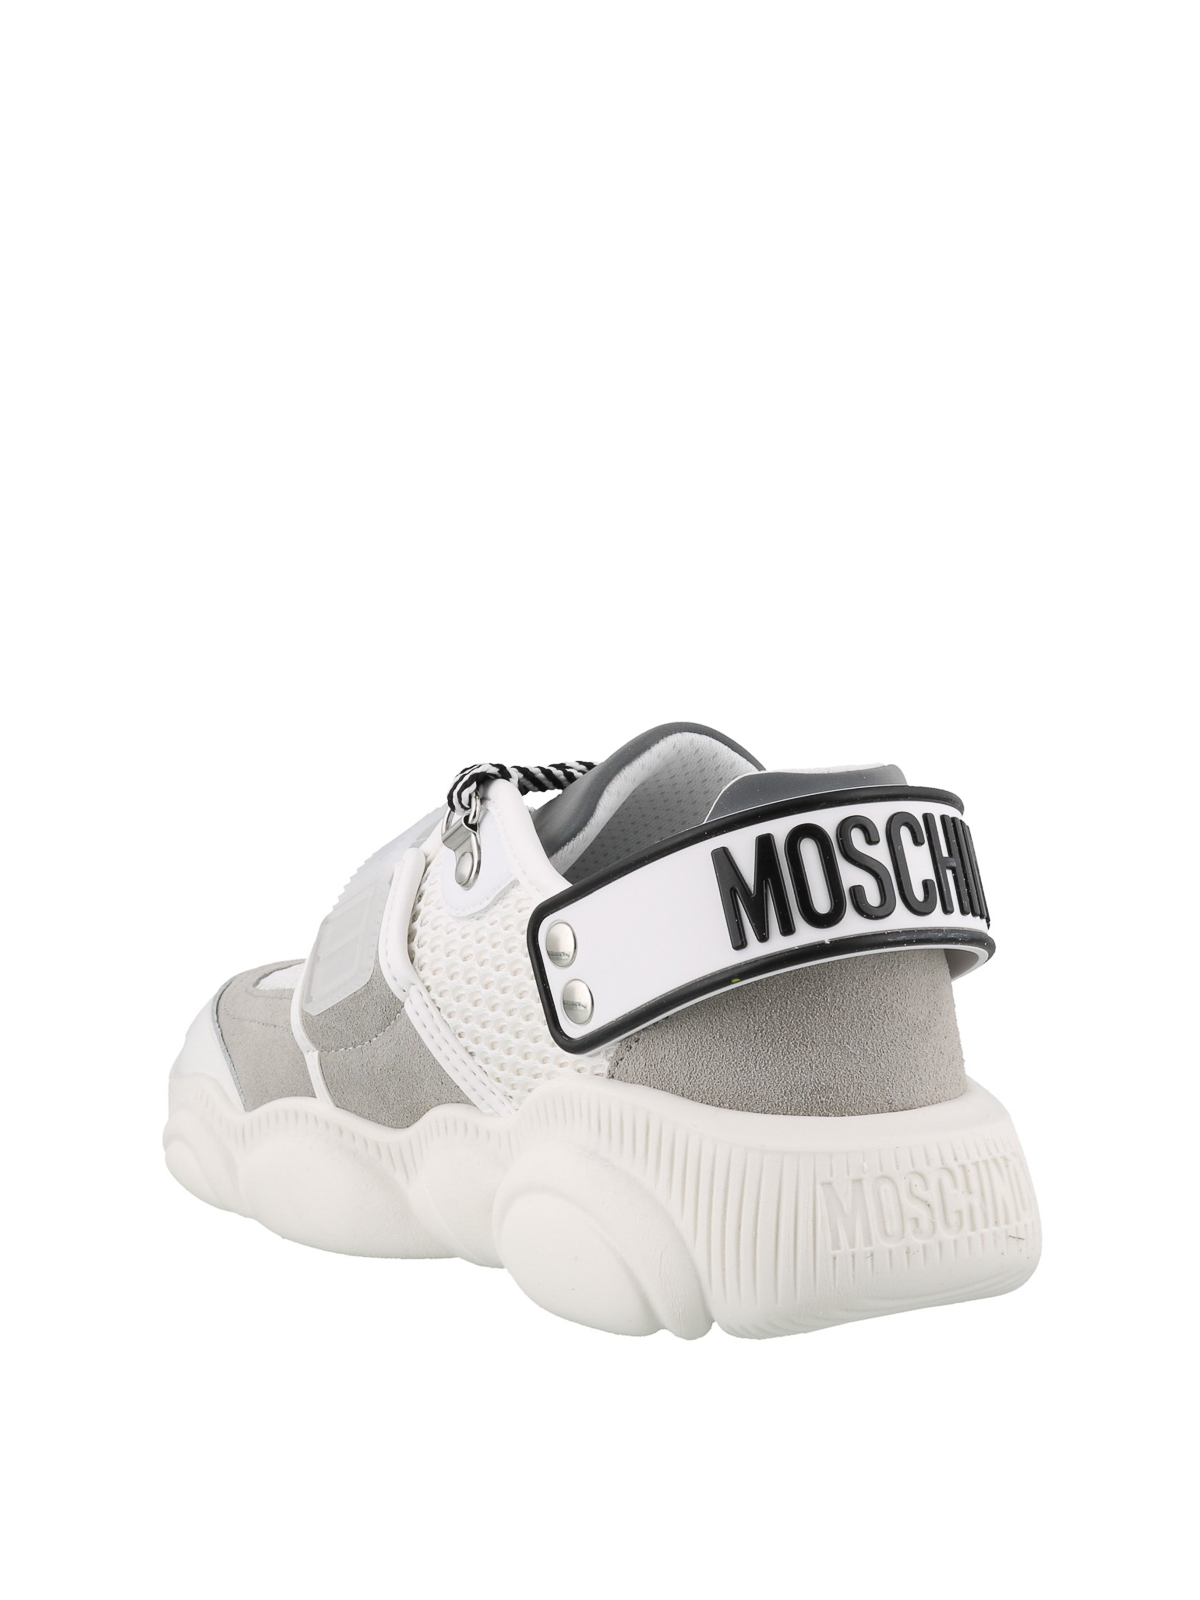 Moschino - Teddy Roller Skates sneakers 